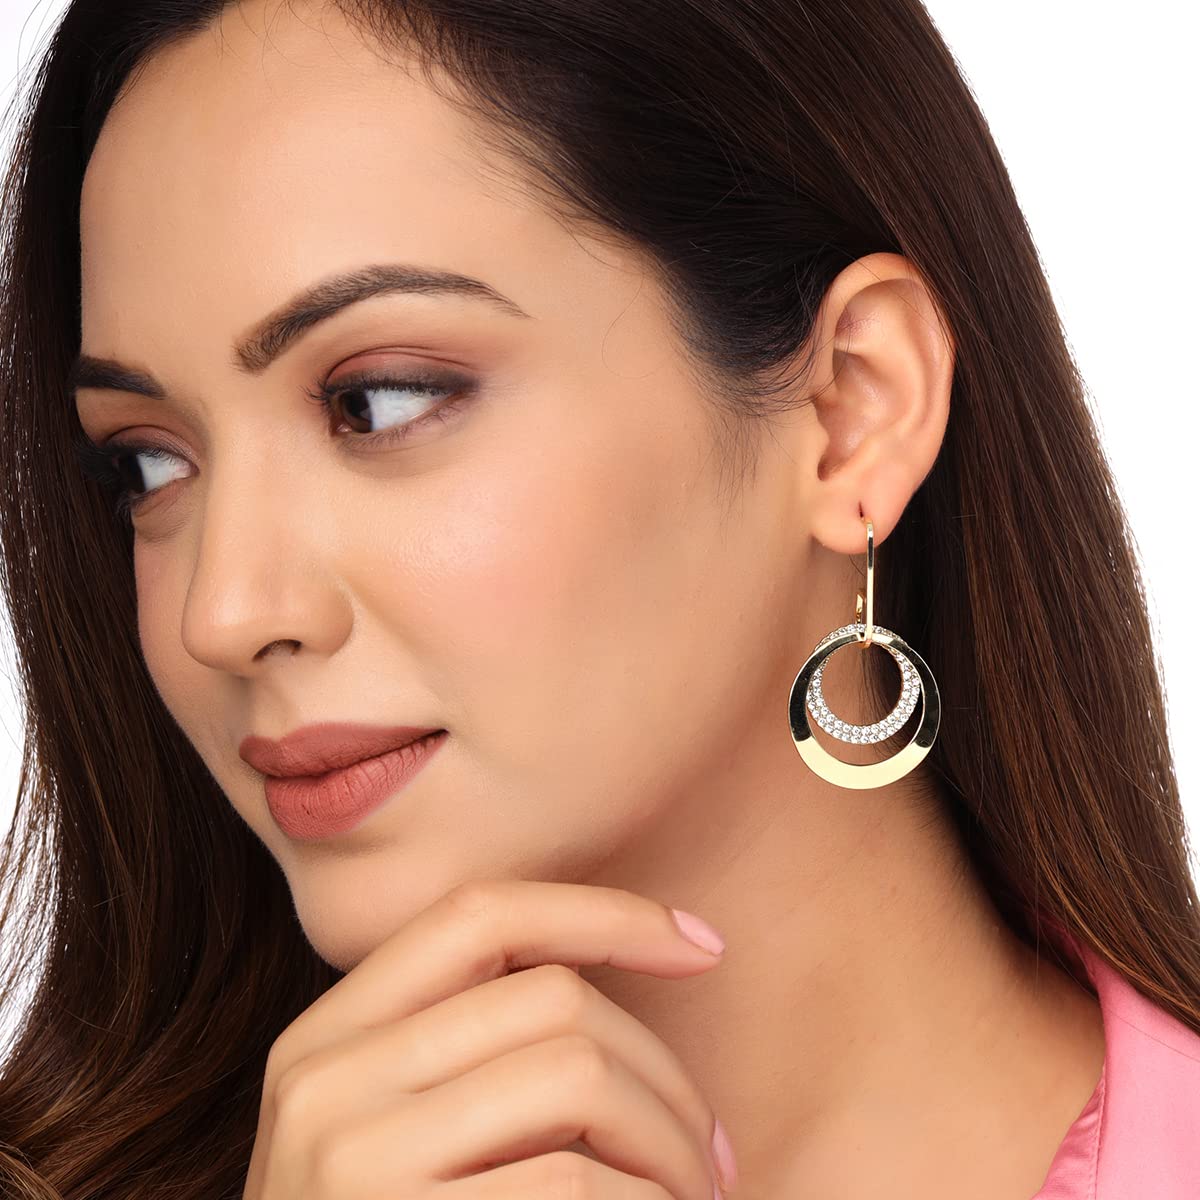 Yellow Chimes Earrings For Women Gold Plated Crystal Studded Double Open Circle Hanging Drop Earrings For Women and Girls